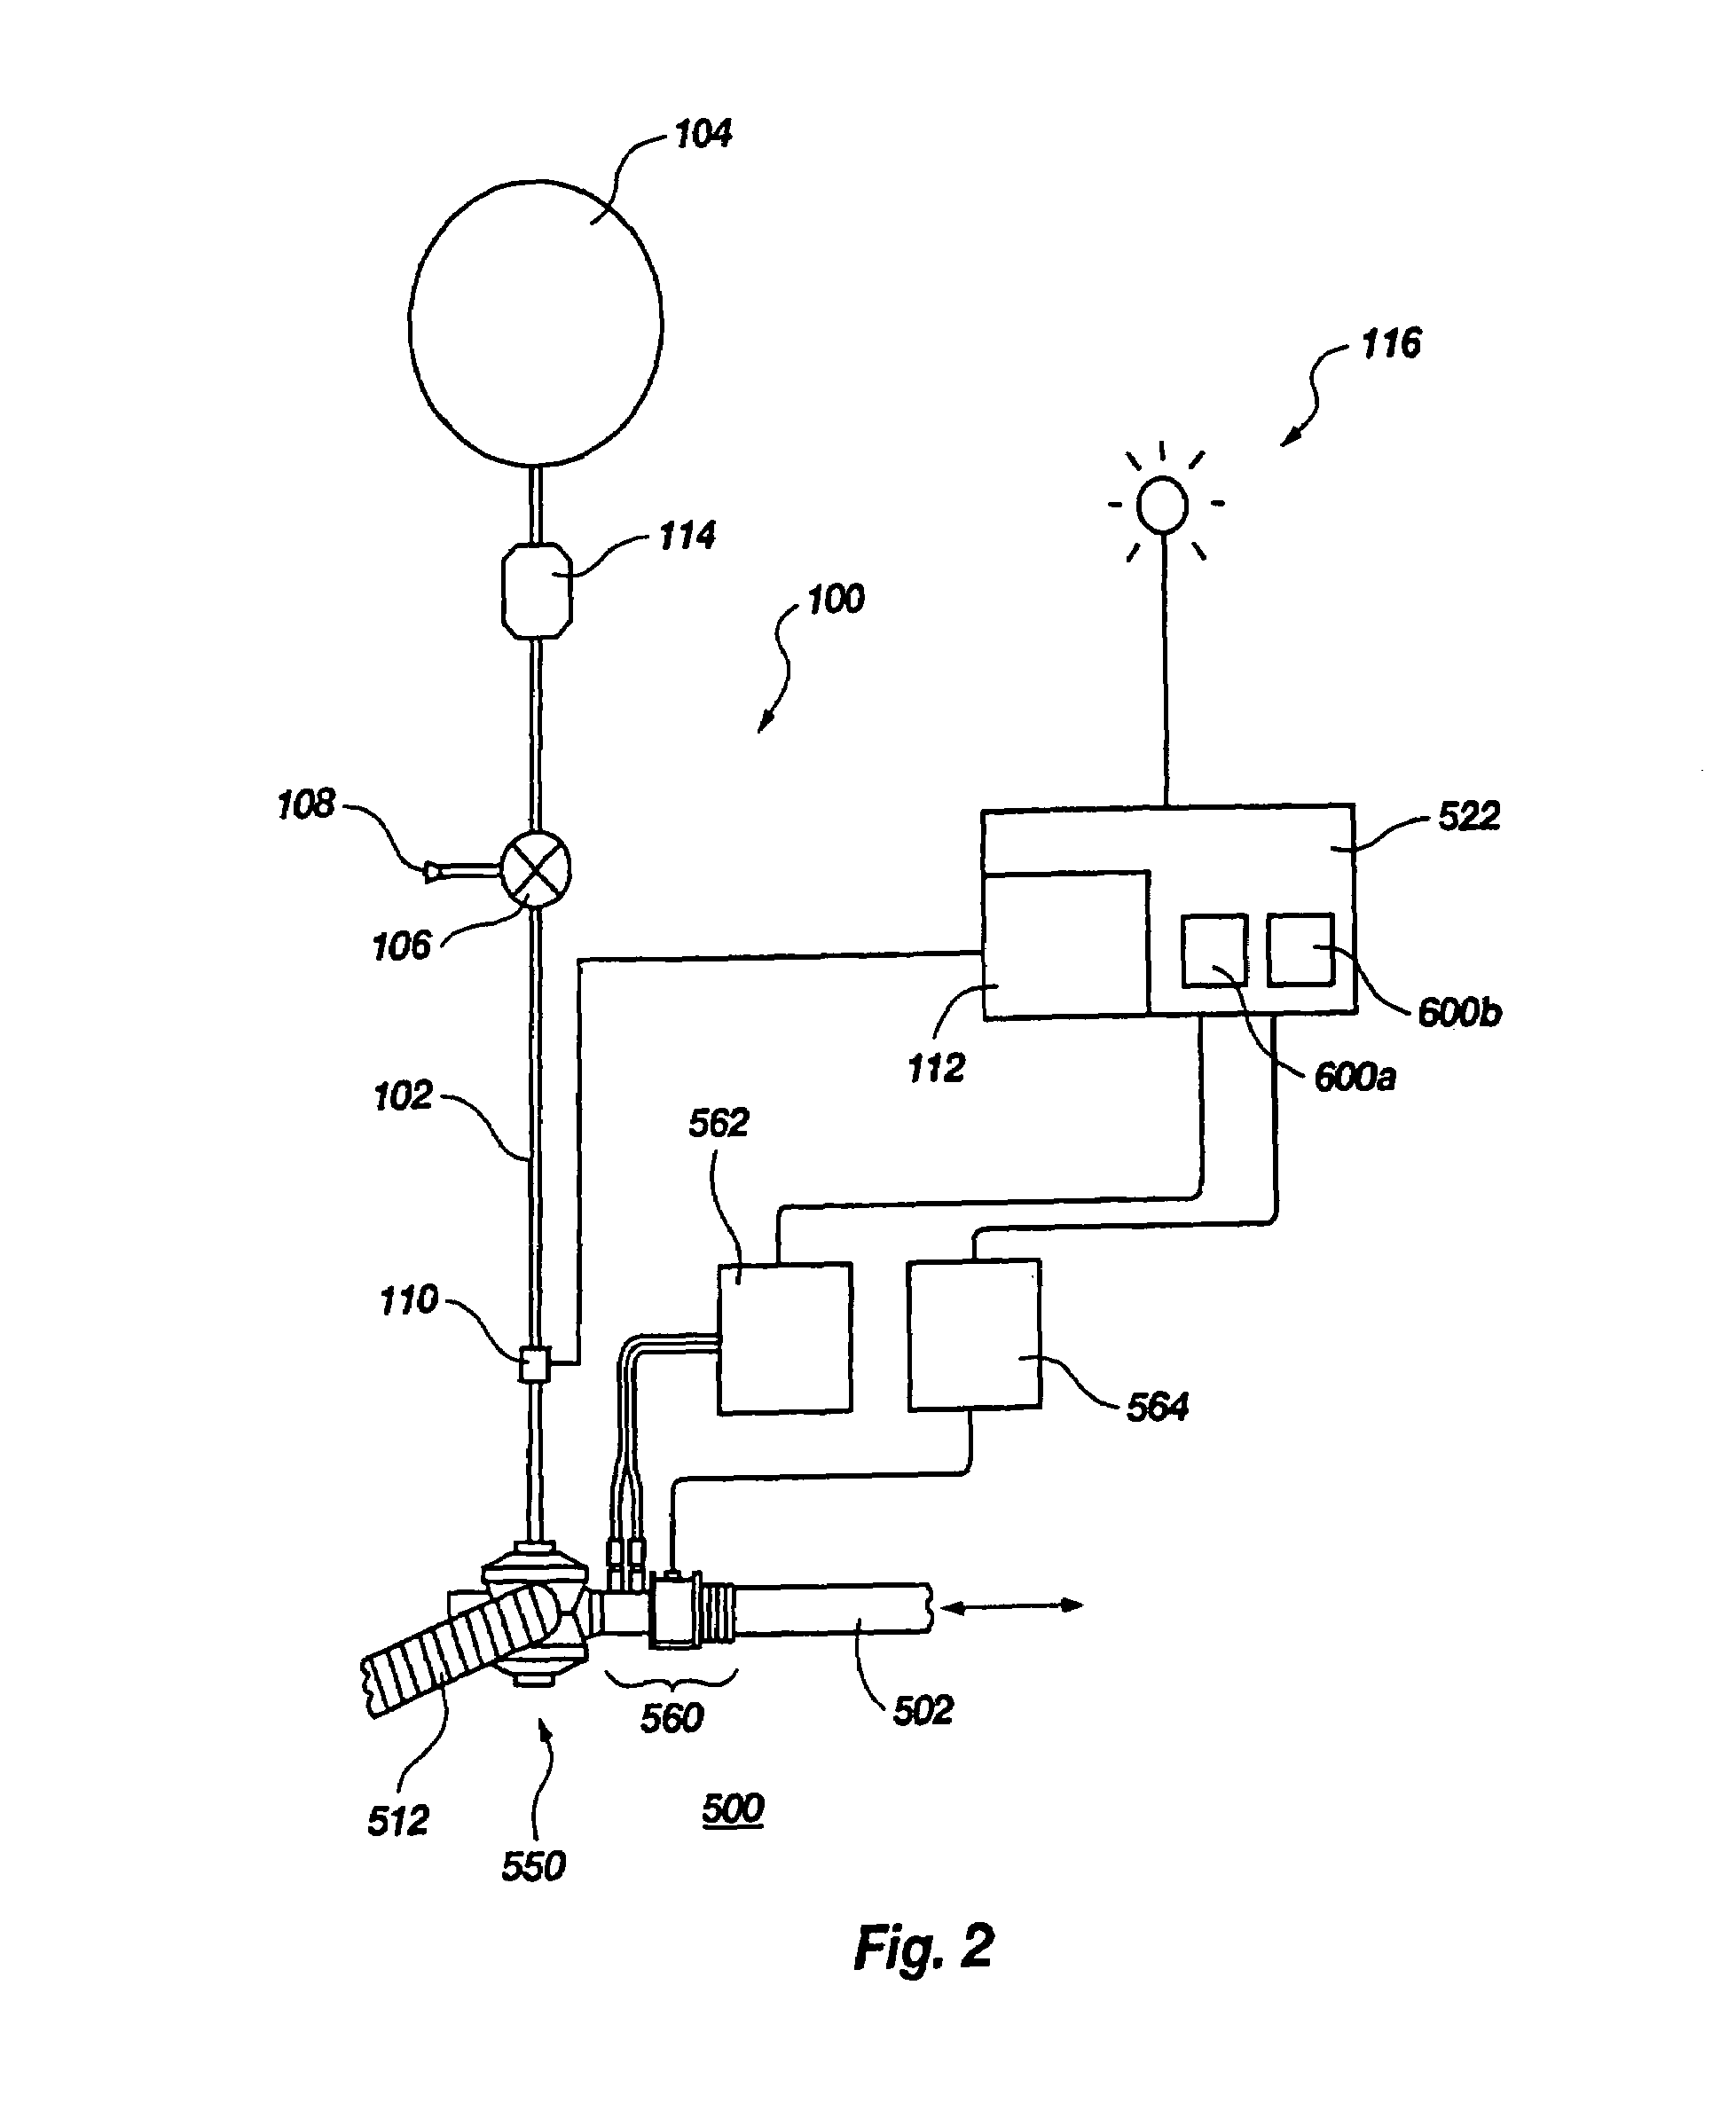 Reliability-enhanced apparatus operation for re-breathing and methods of effecting same